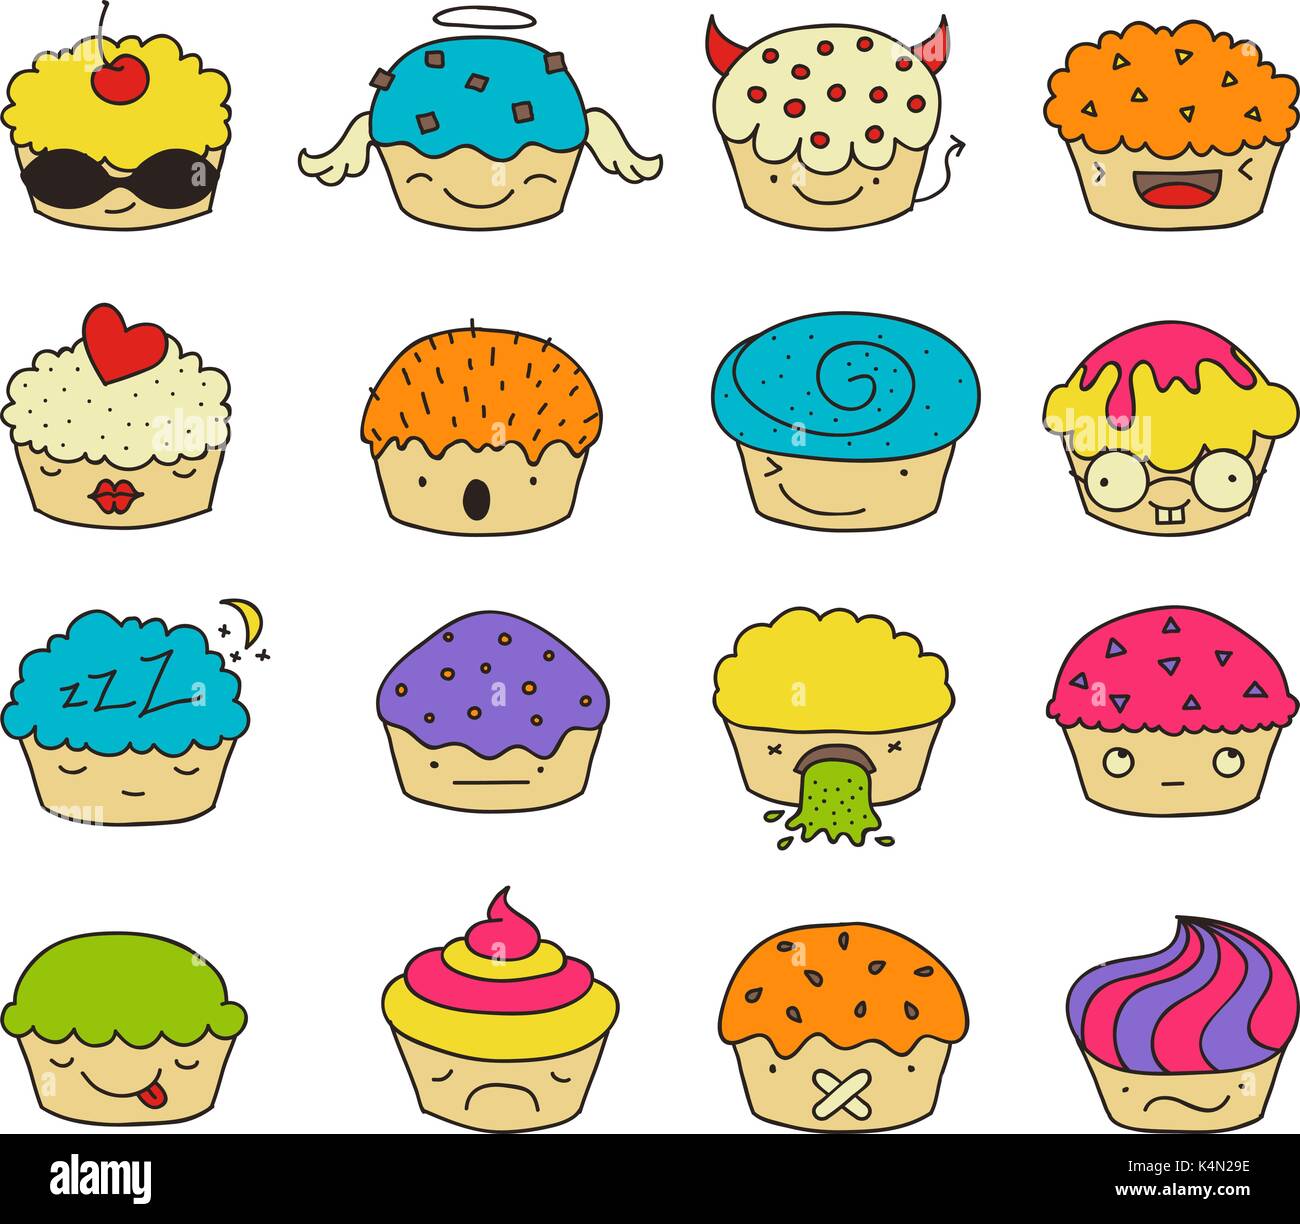 Cute and colorful kawaii style muffin emoticons collection expressing different emotions or feelings. Stock Vector